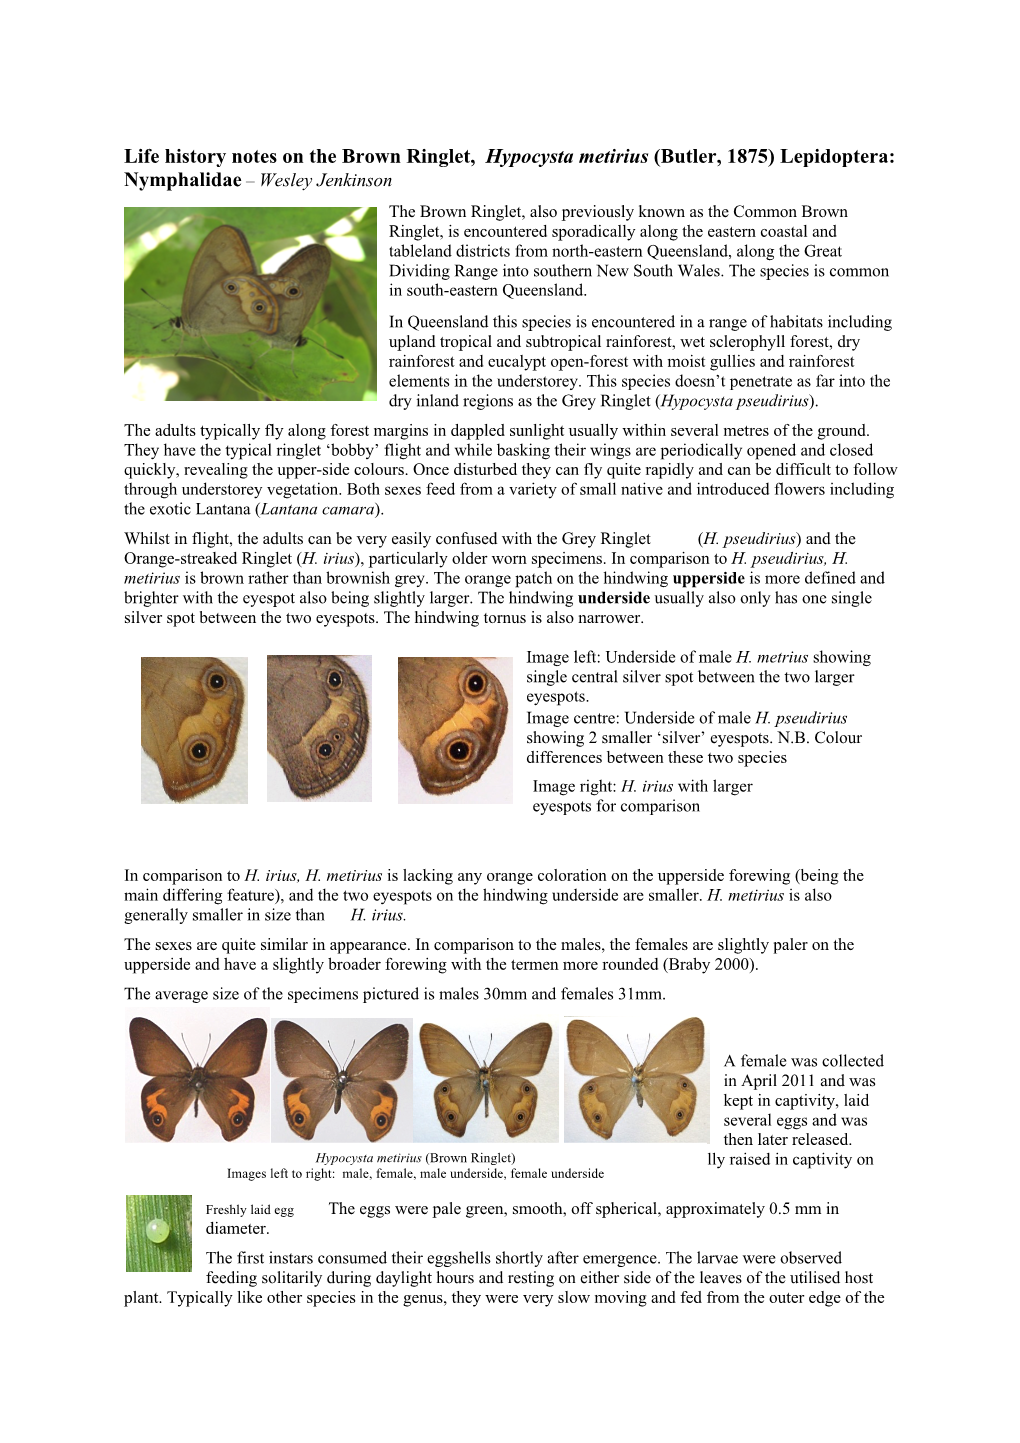 Life History Notes on the Brown Ringlet, Hypocysta Metirius (Butler, 1875) Lepidoptera: Nymphalidae – Wesley Jenkinson